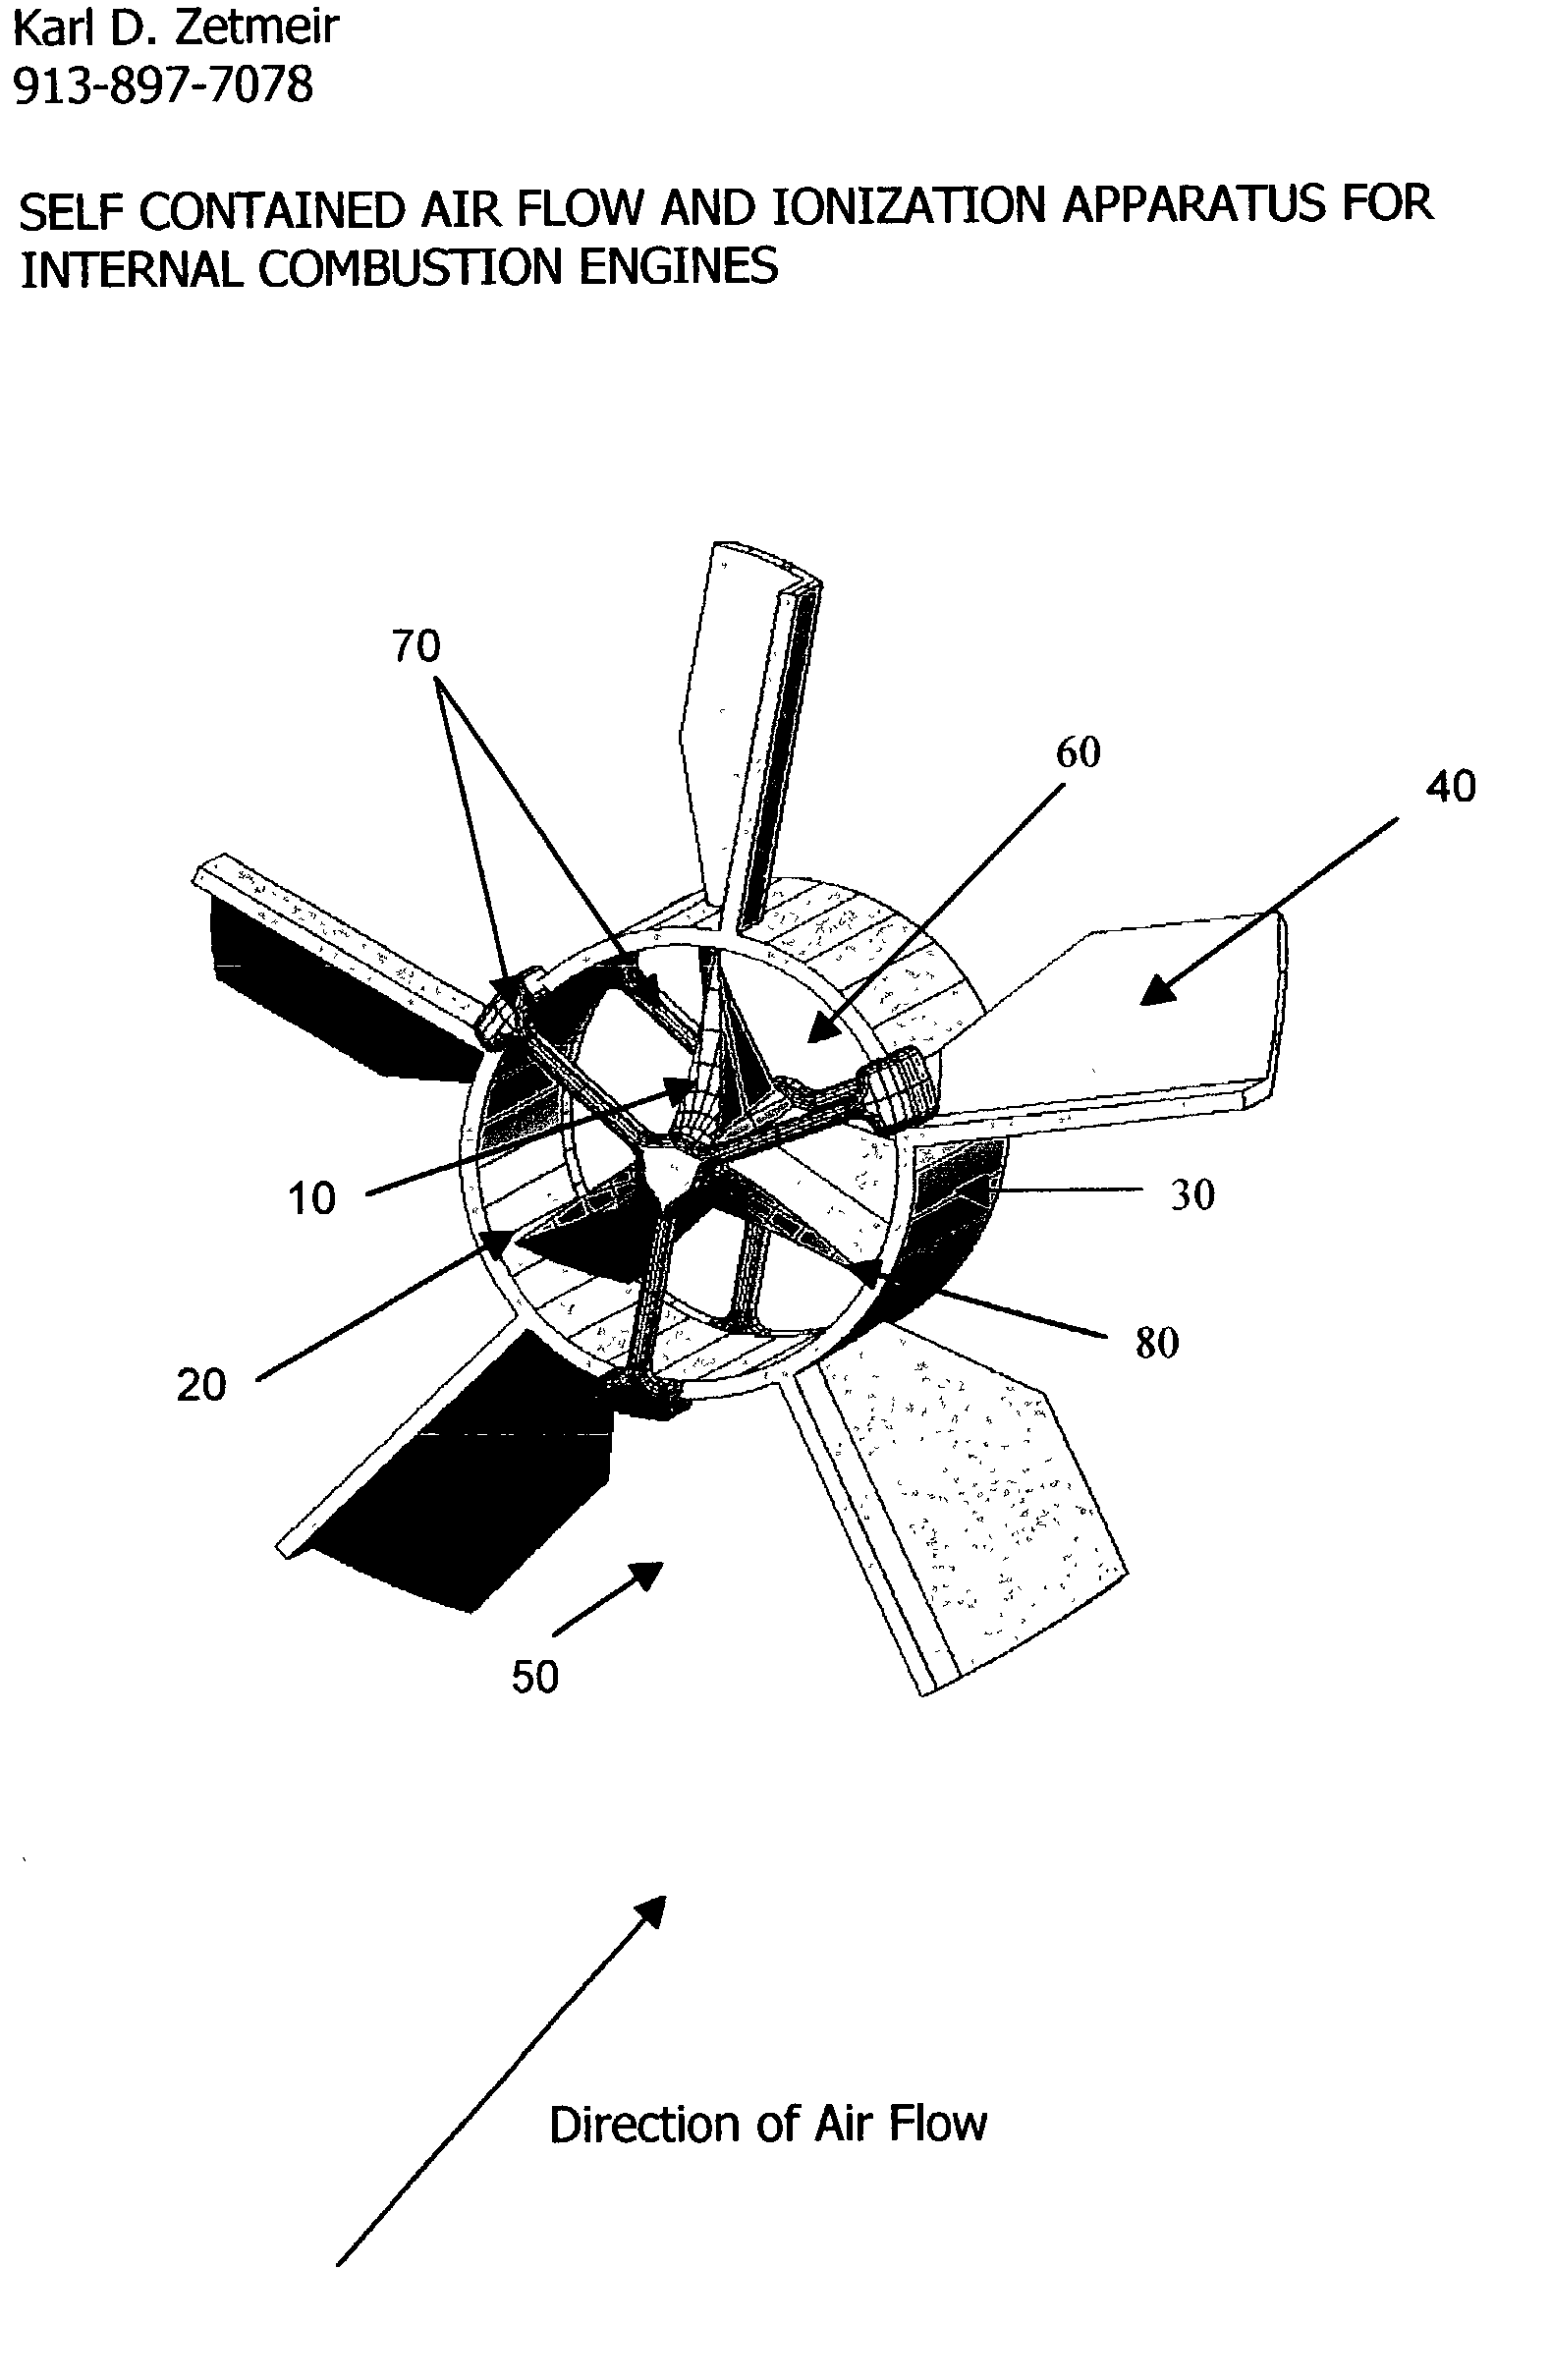 Self contained air flow and ionization method, apparatus and design for internal combustion engines